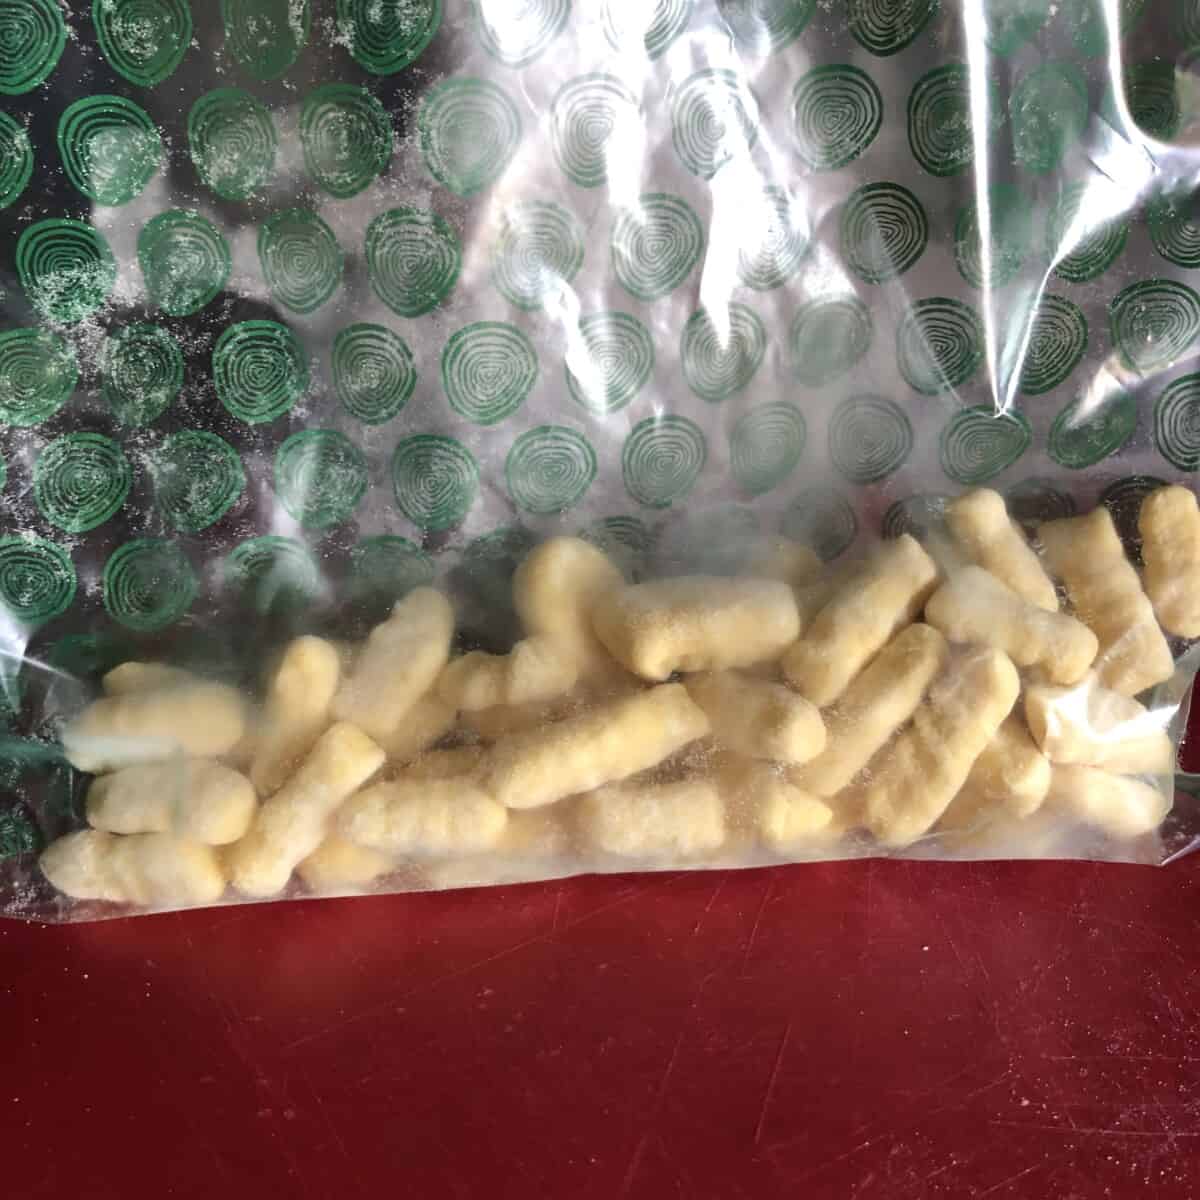 frozen gnocchi added to a freezer bag for longterm storage.